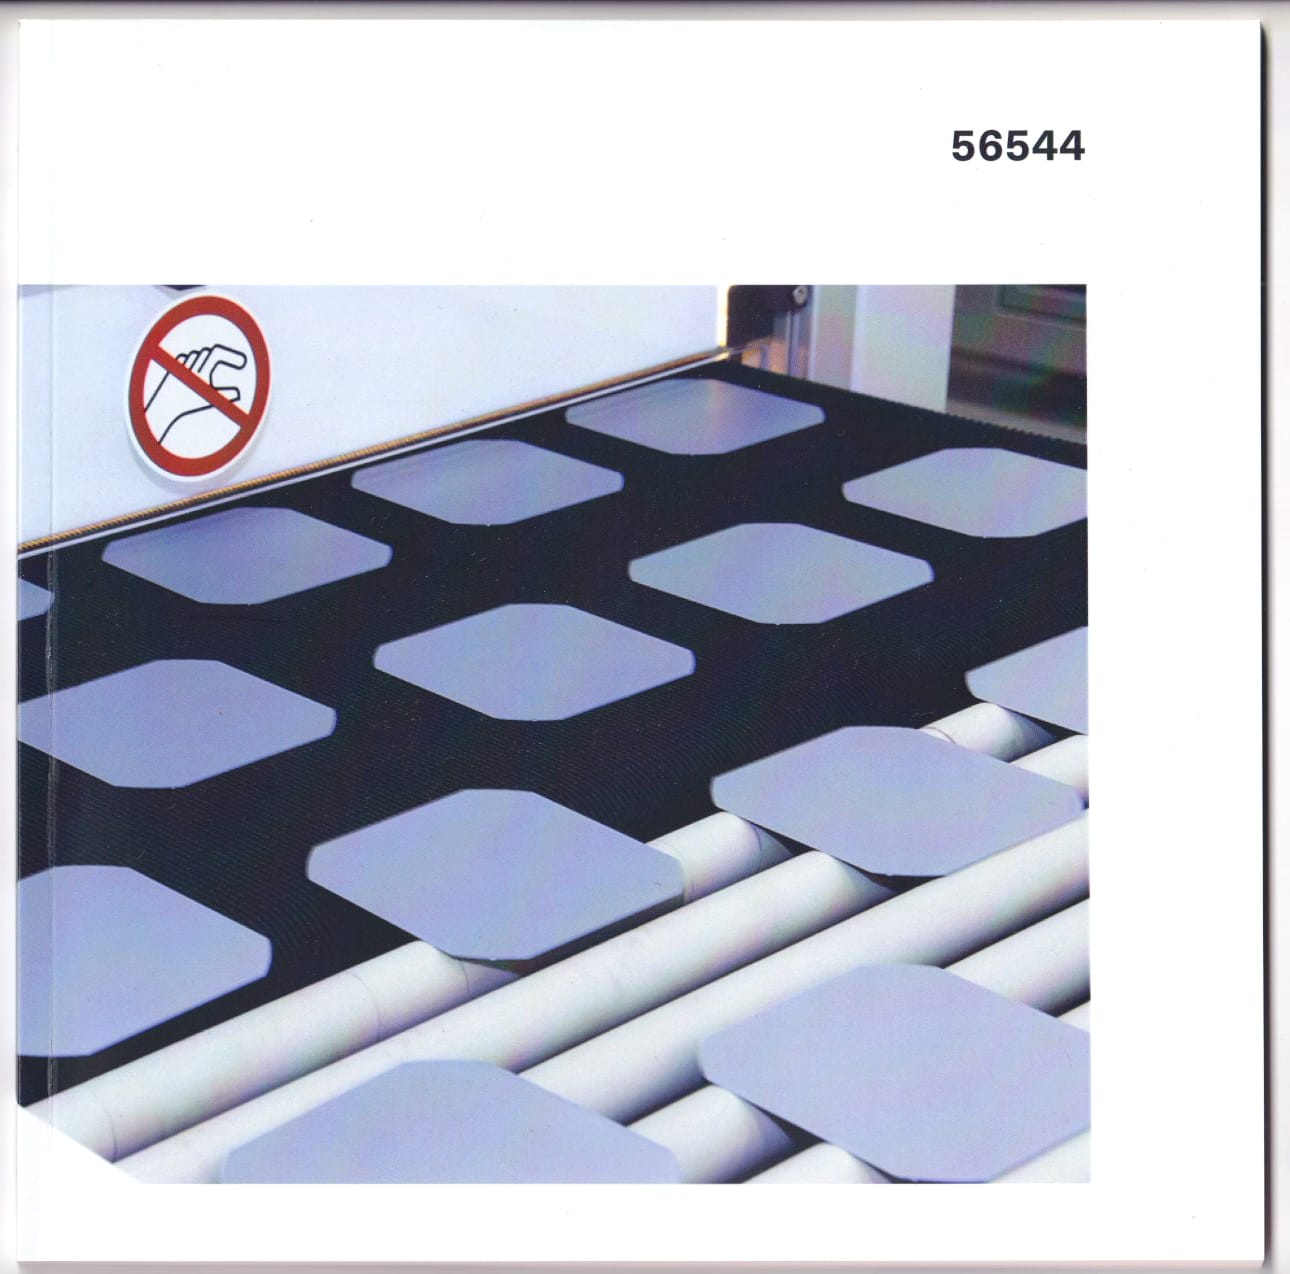 TThe cover of the print version of the text, showing a commons image of wafers on a conveyor belt.